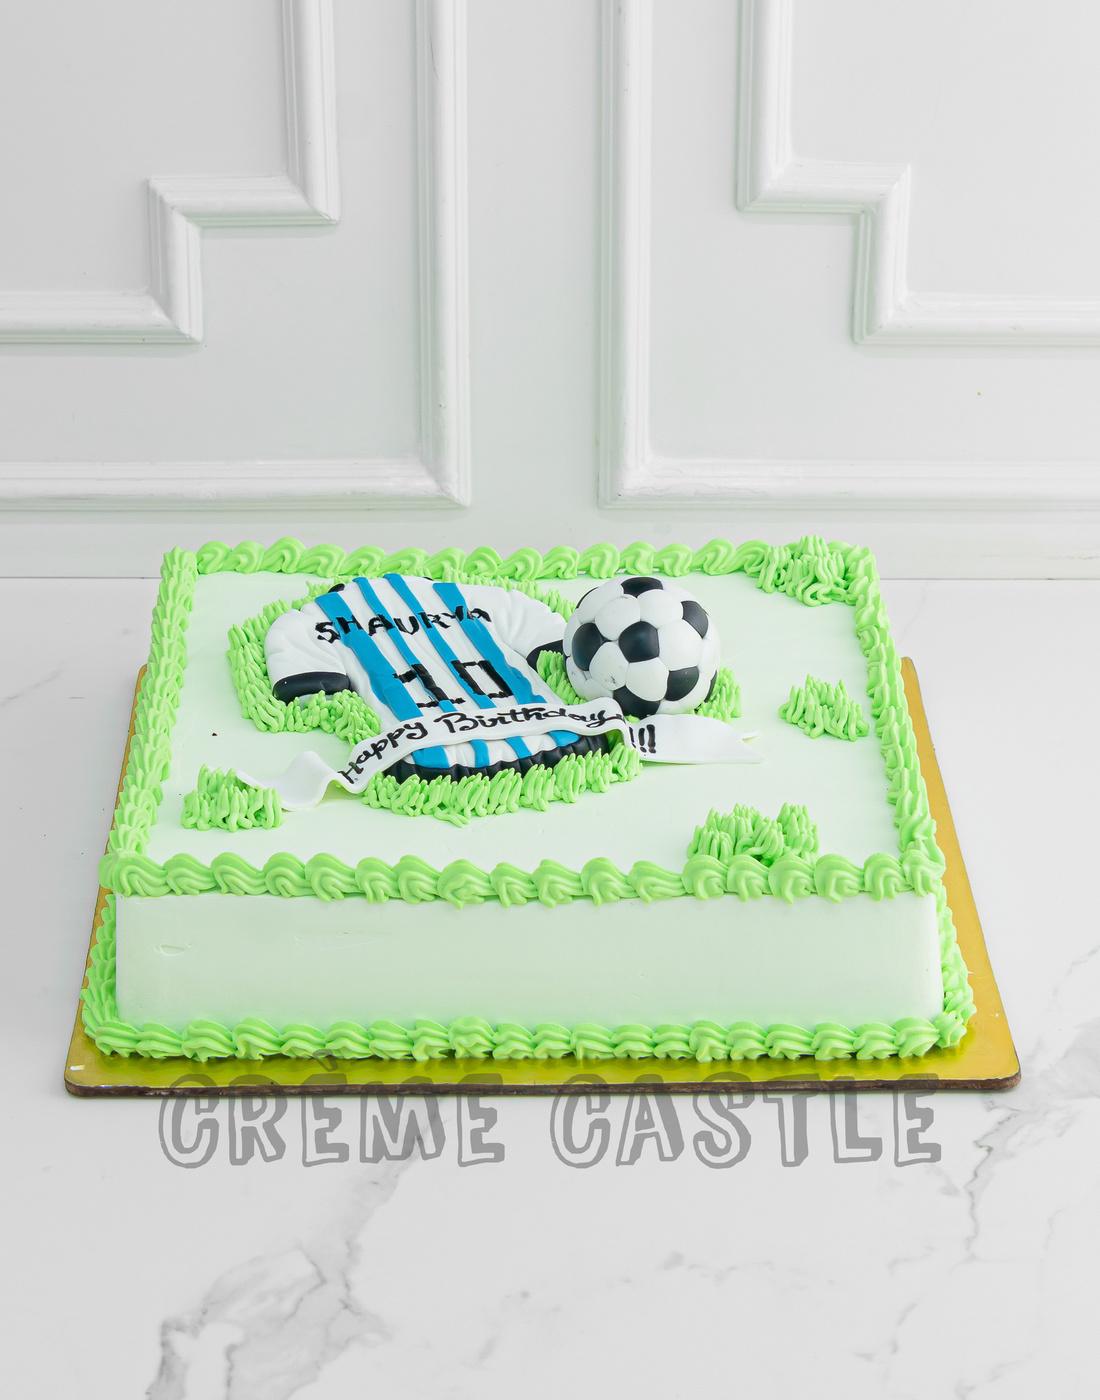 Football Themed Fondant Cake 3.5 Kg : Gift/Send QFilter Gifts Online  HD1117557 |IGP.com